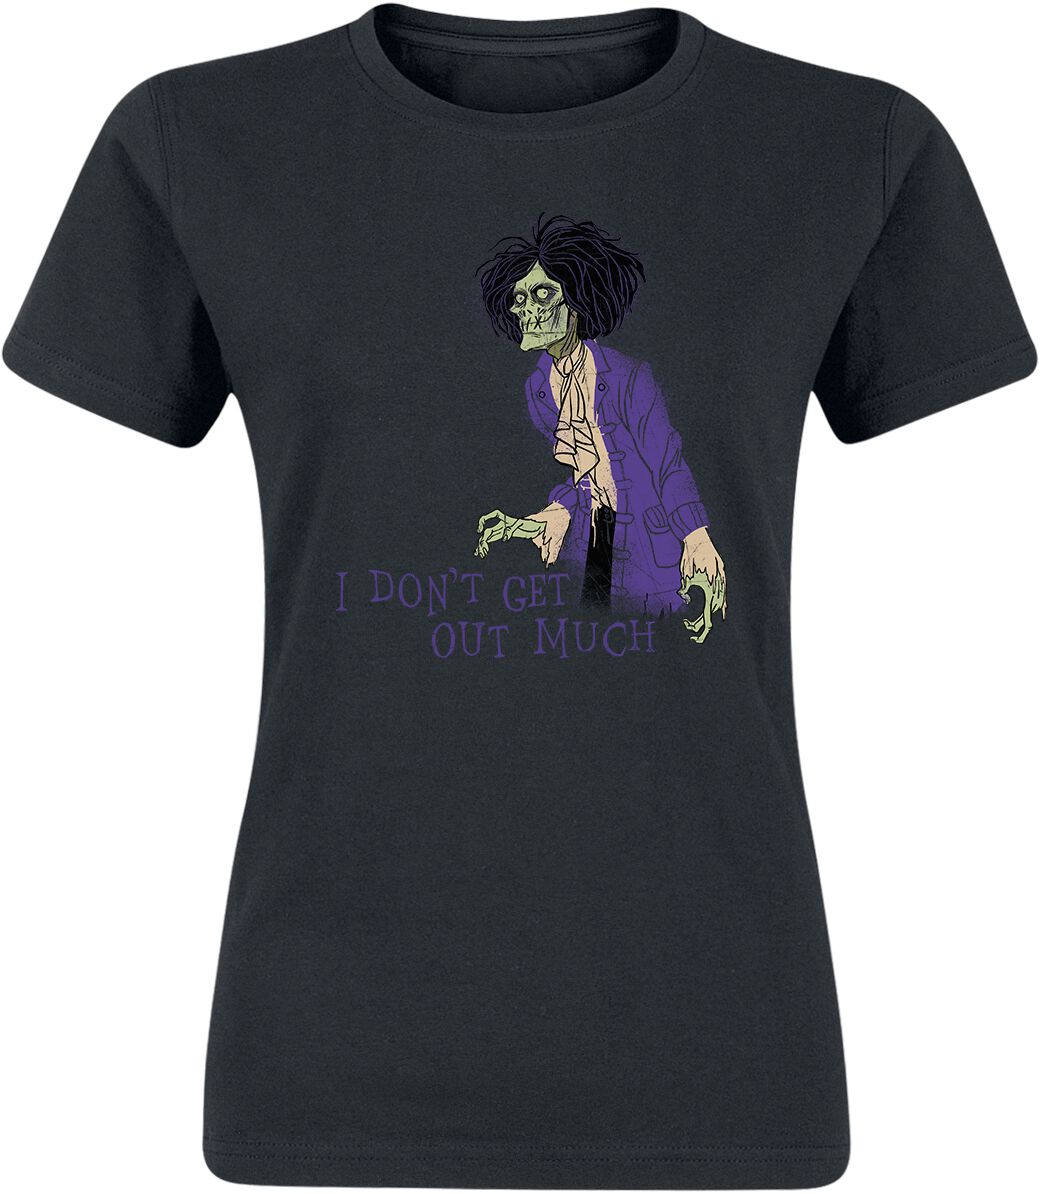 Hocus Pocus - I Don't Get Out Much - T-Shirt - Donna - nero